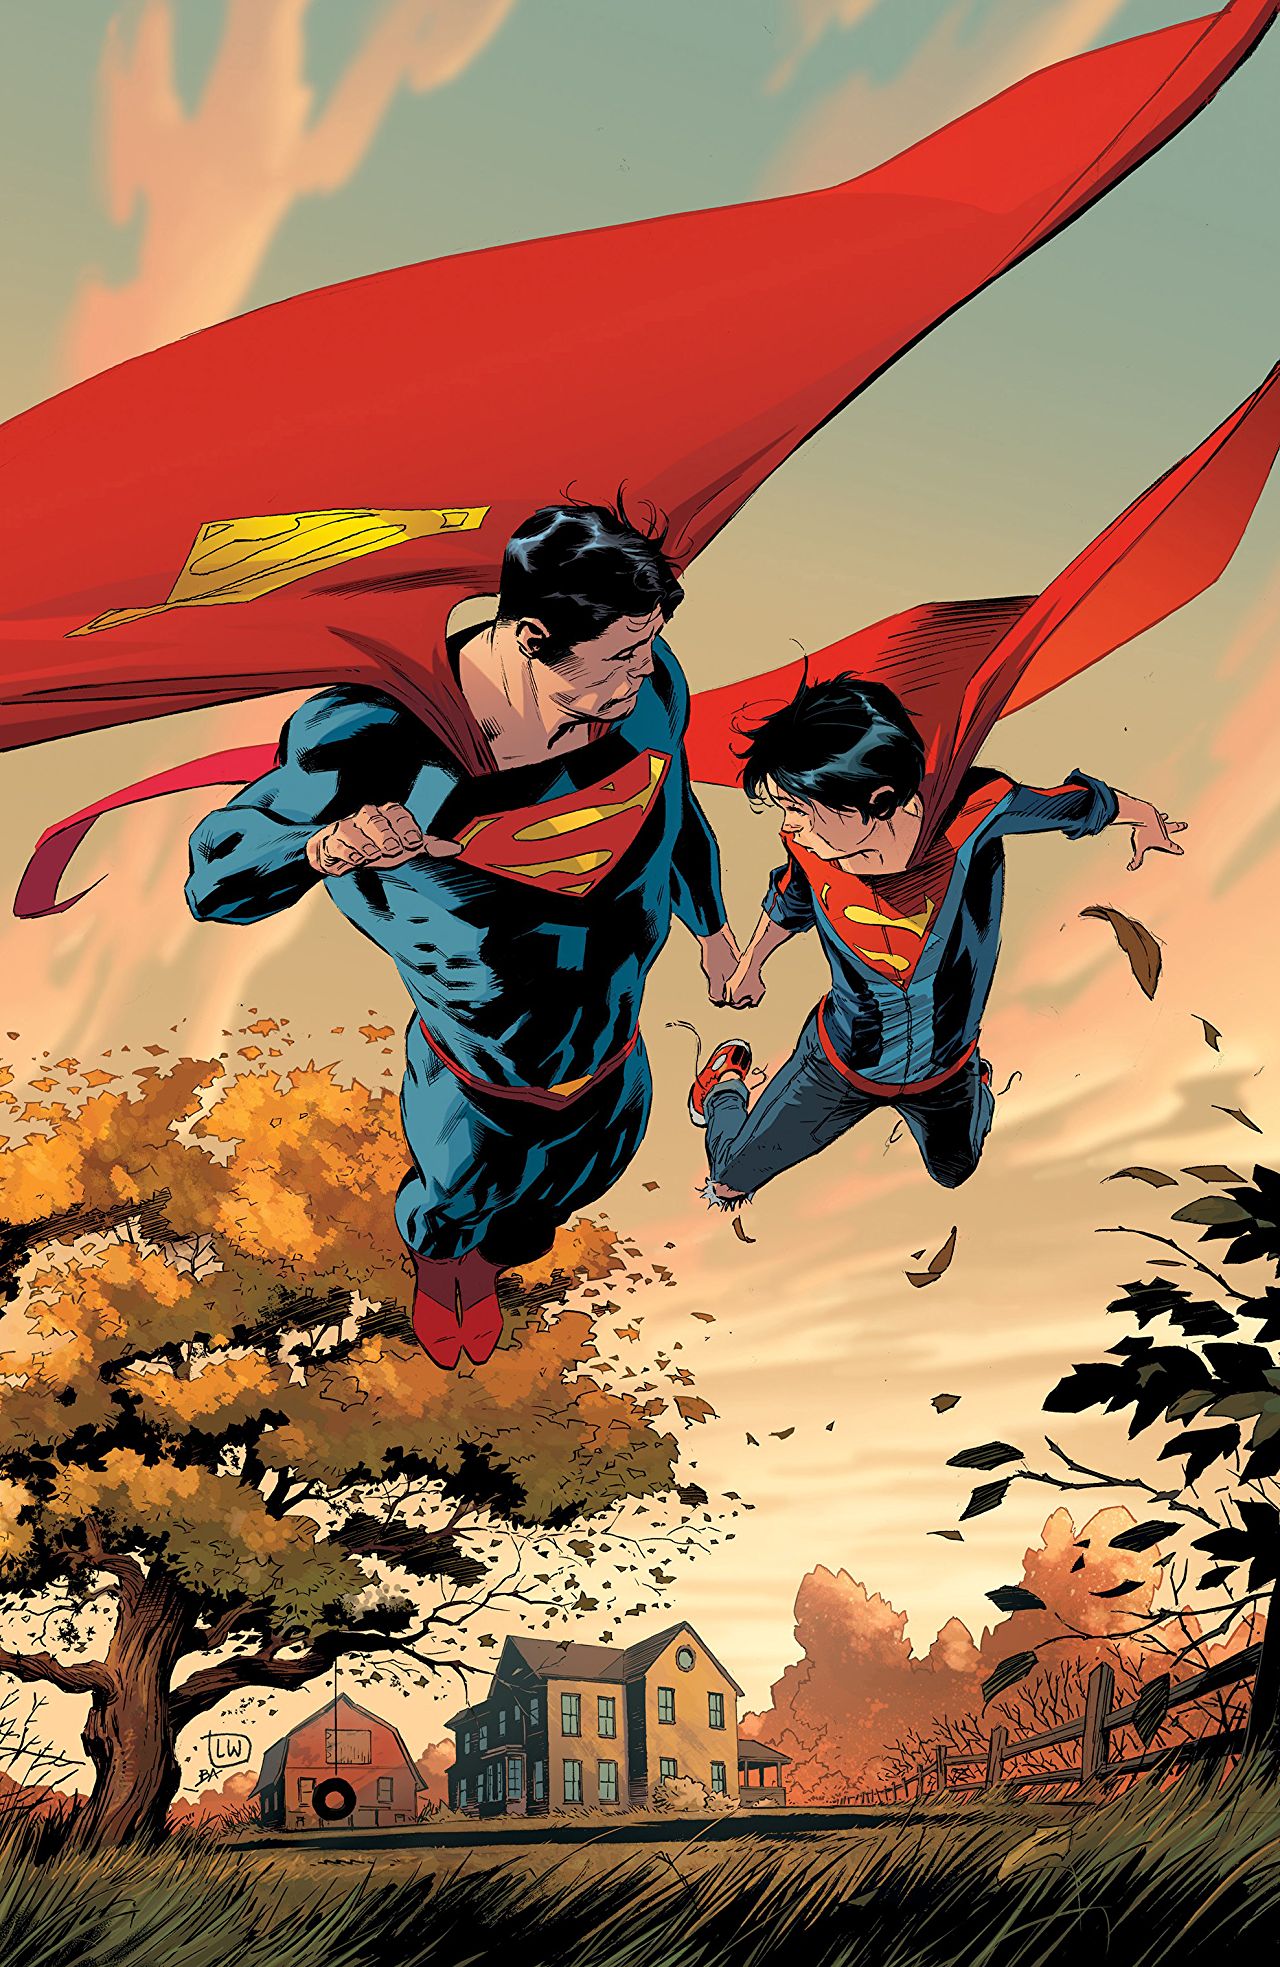 'Superman Vol. 5: Hopes and Fears' forgets why we love the Man of Steel